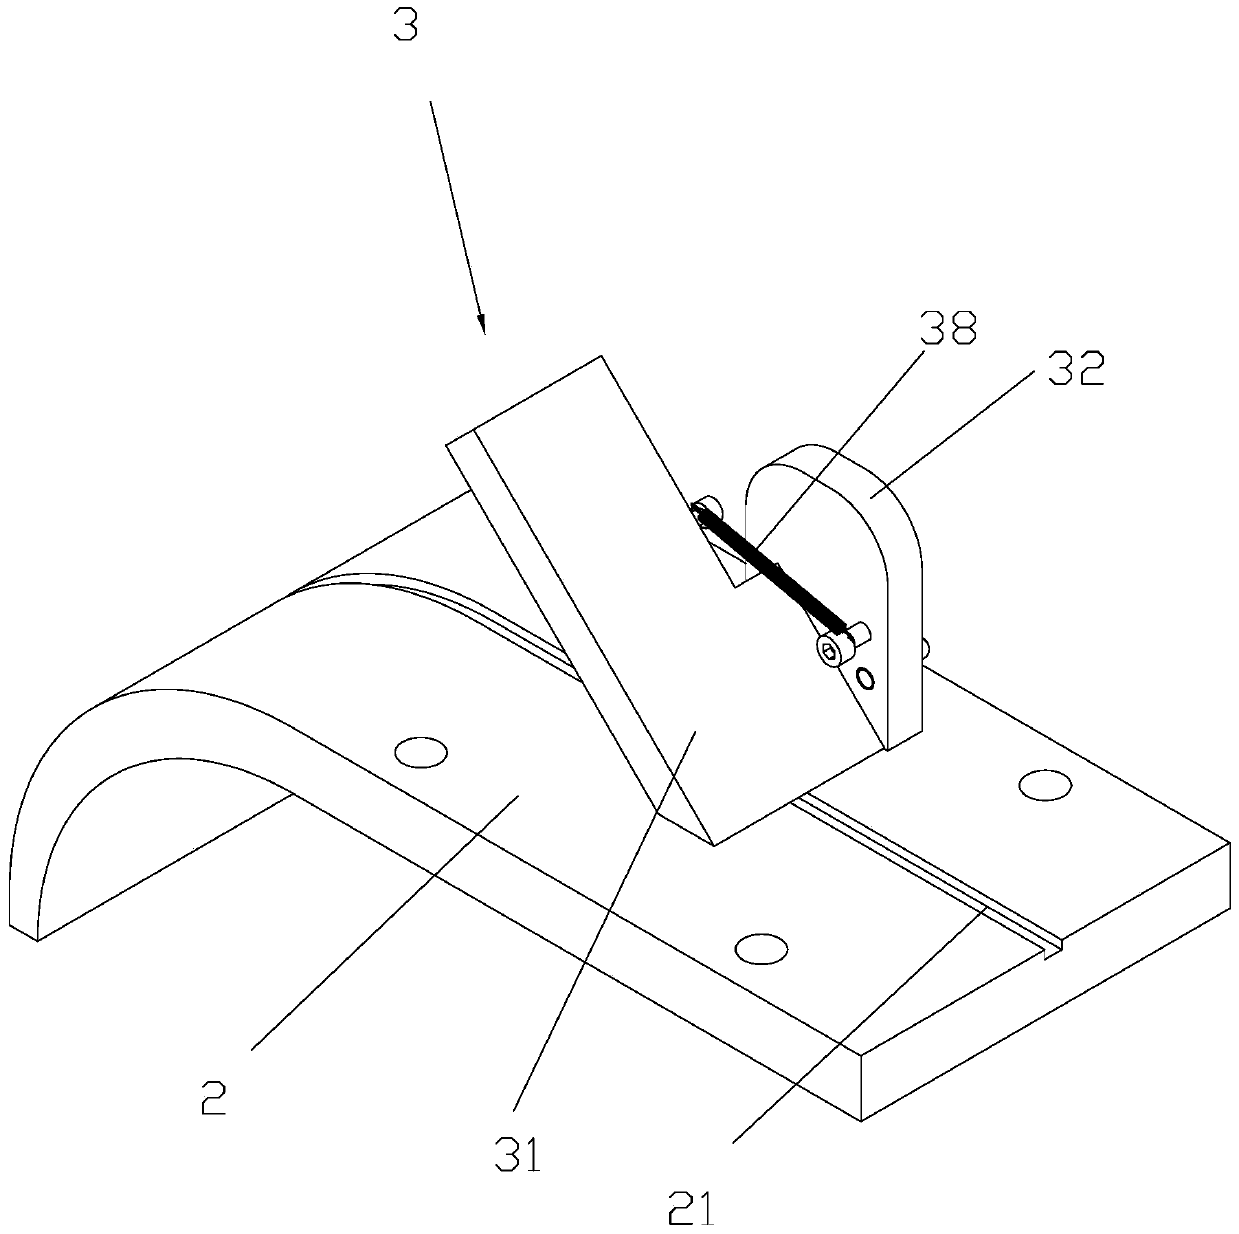 A zipper counting device